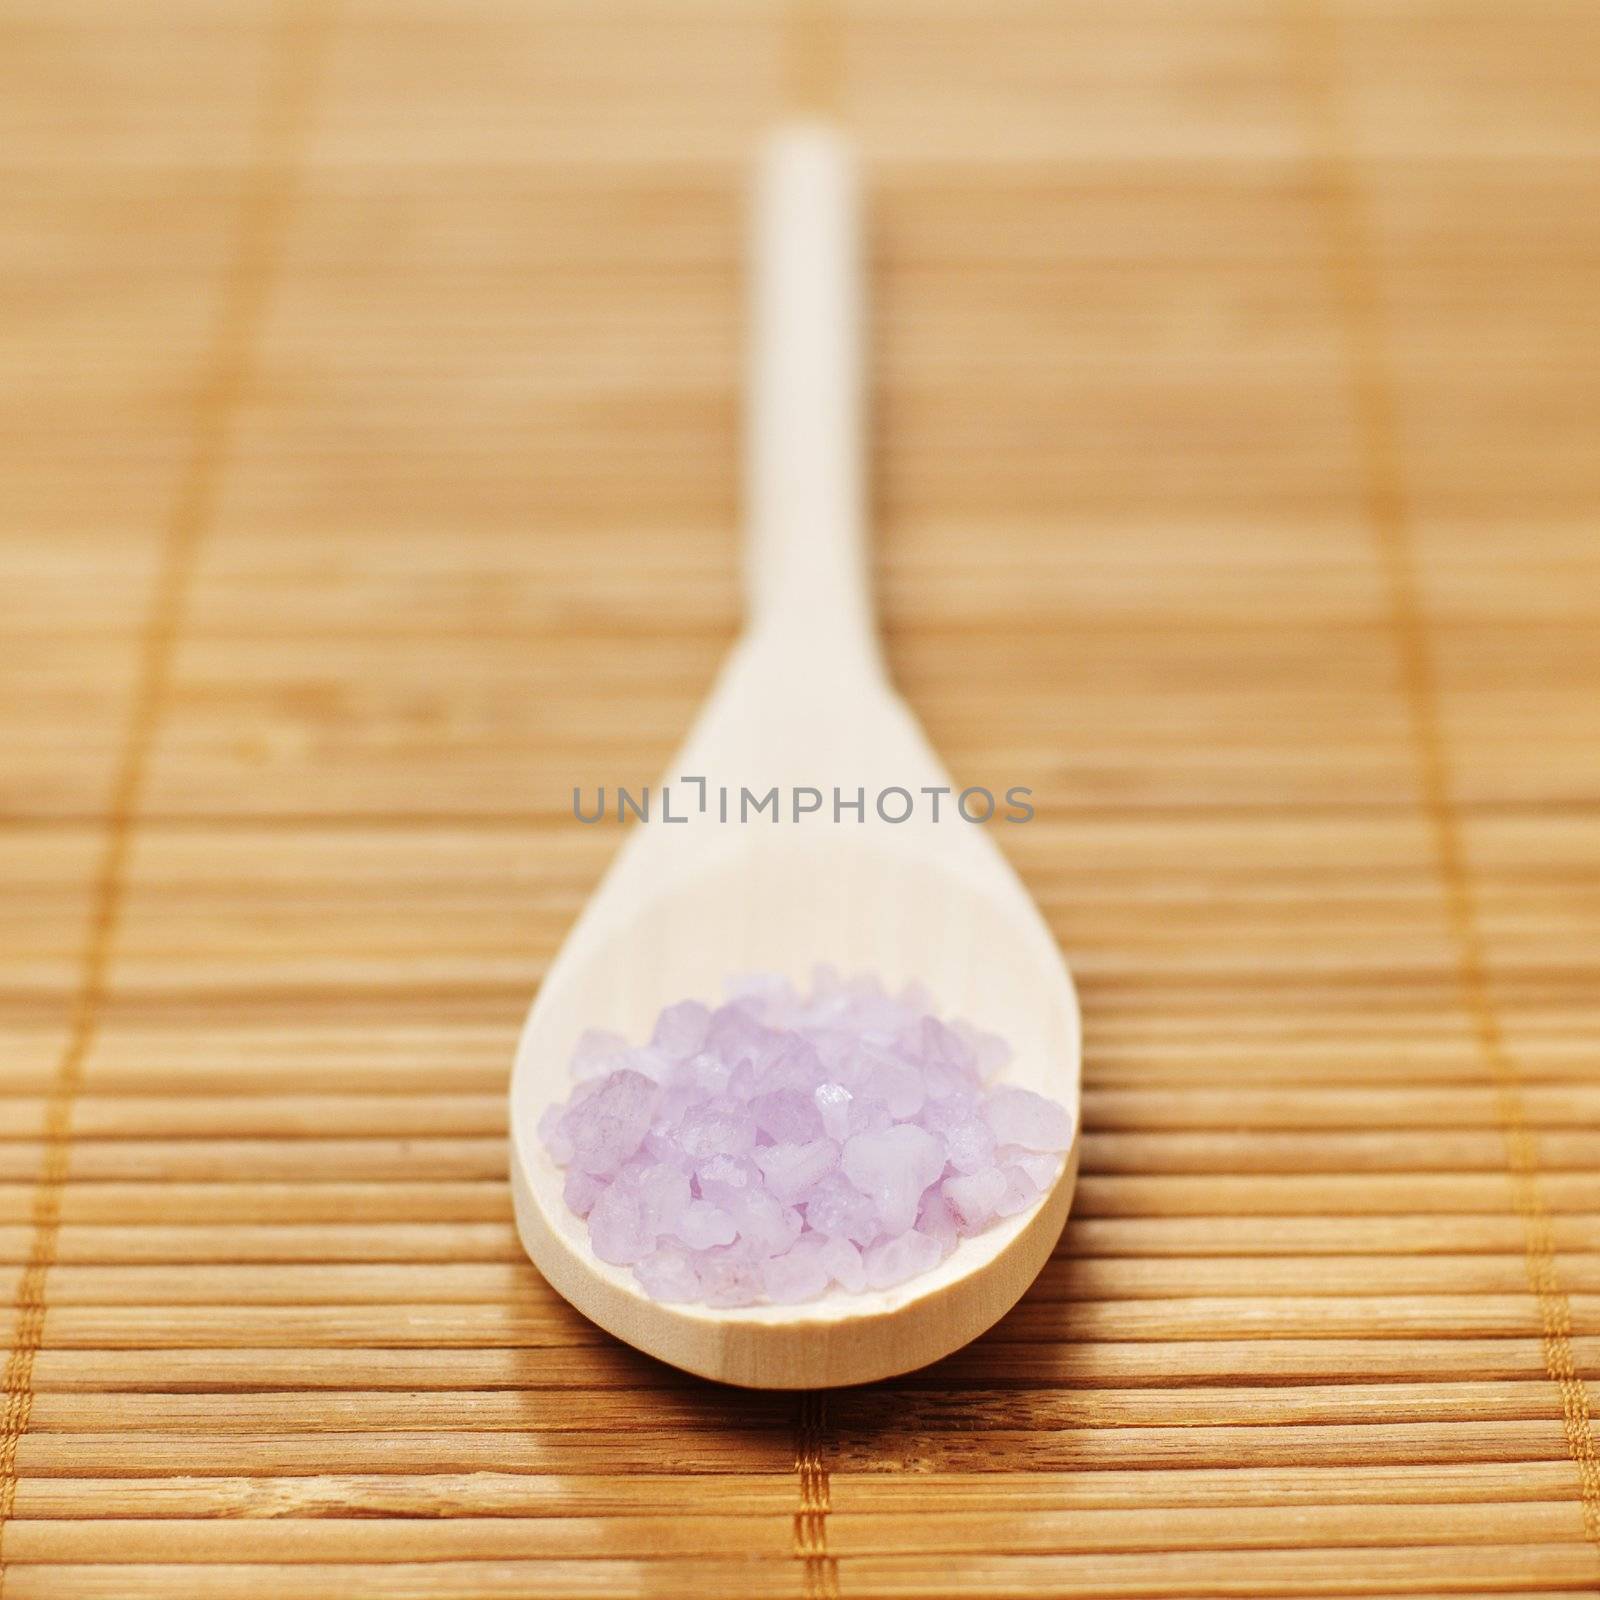 Bath salt and wooden spoon on display against bamboo mat.